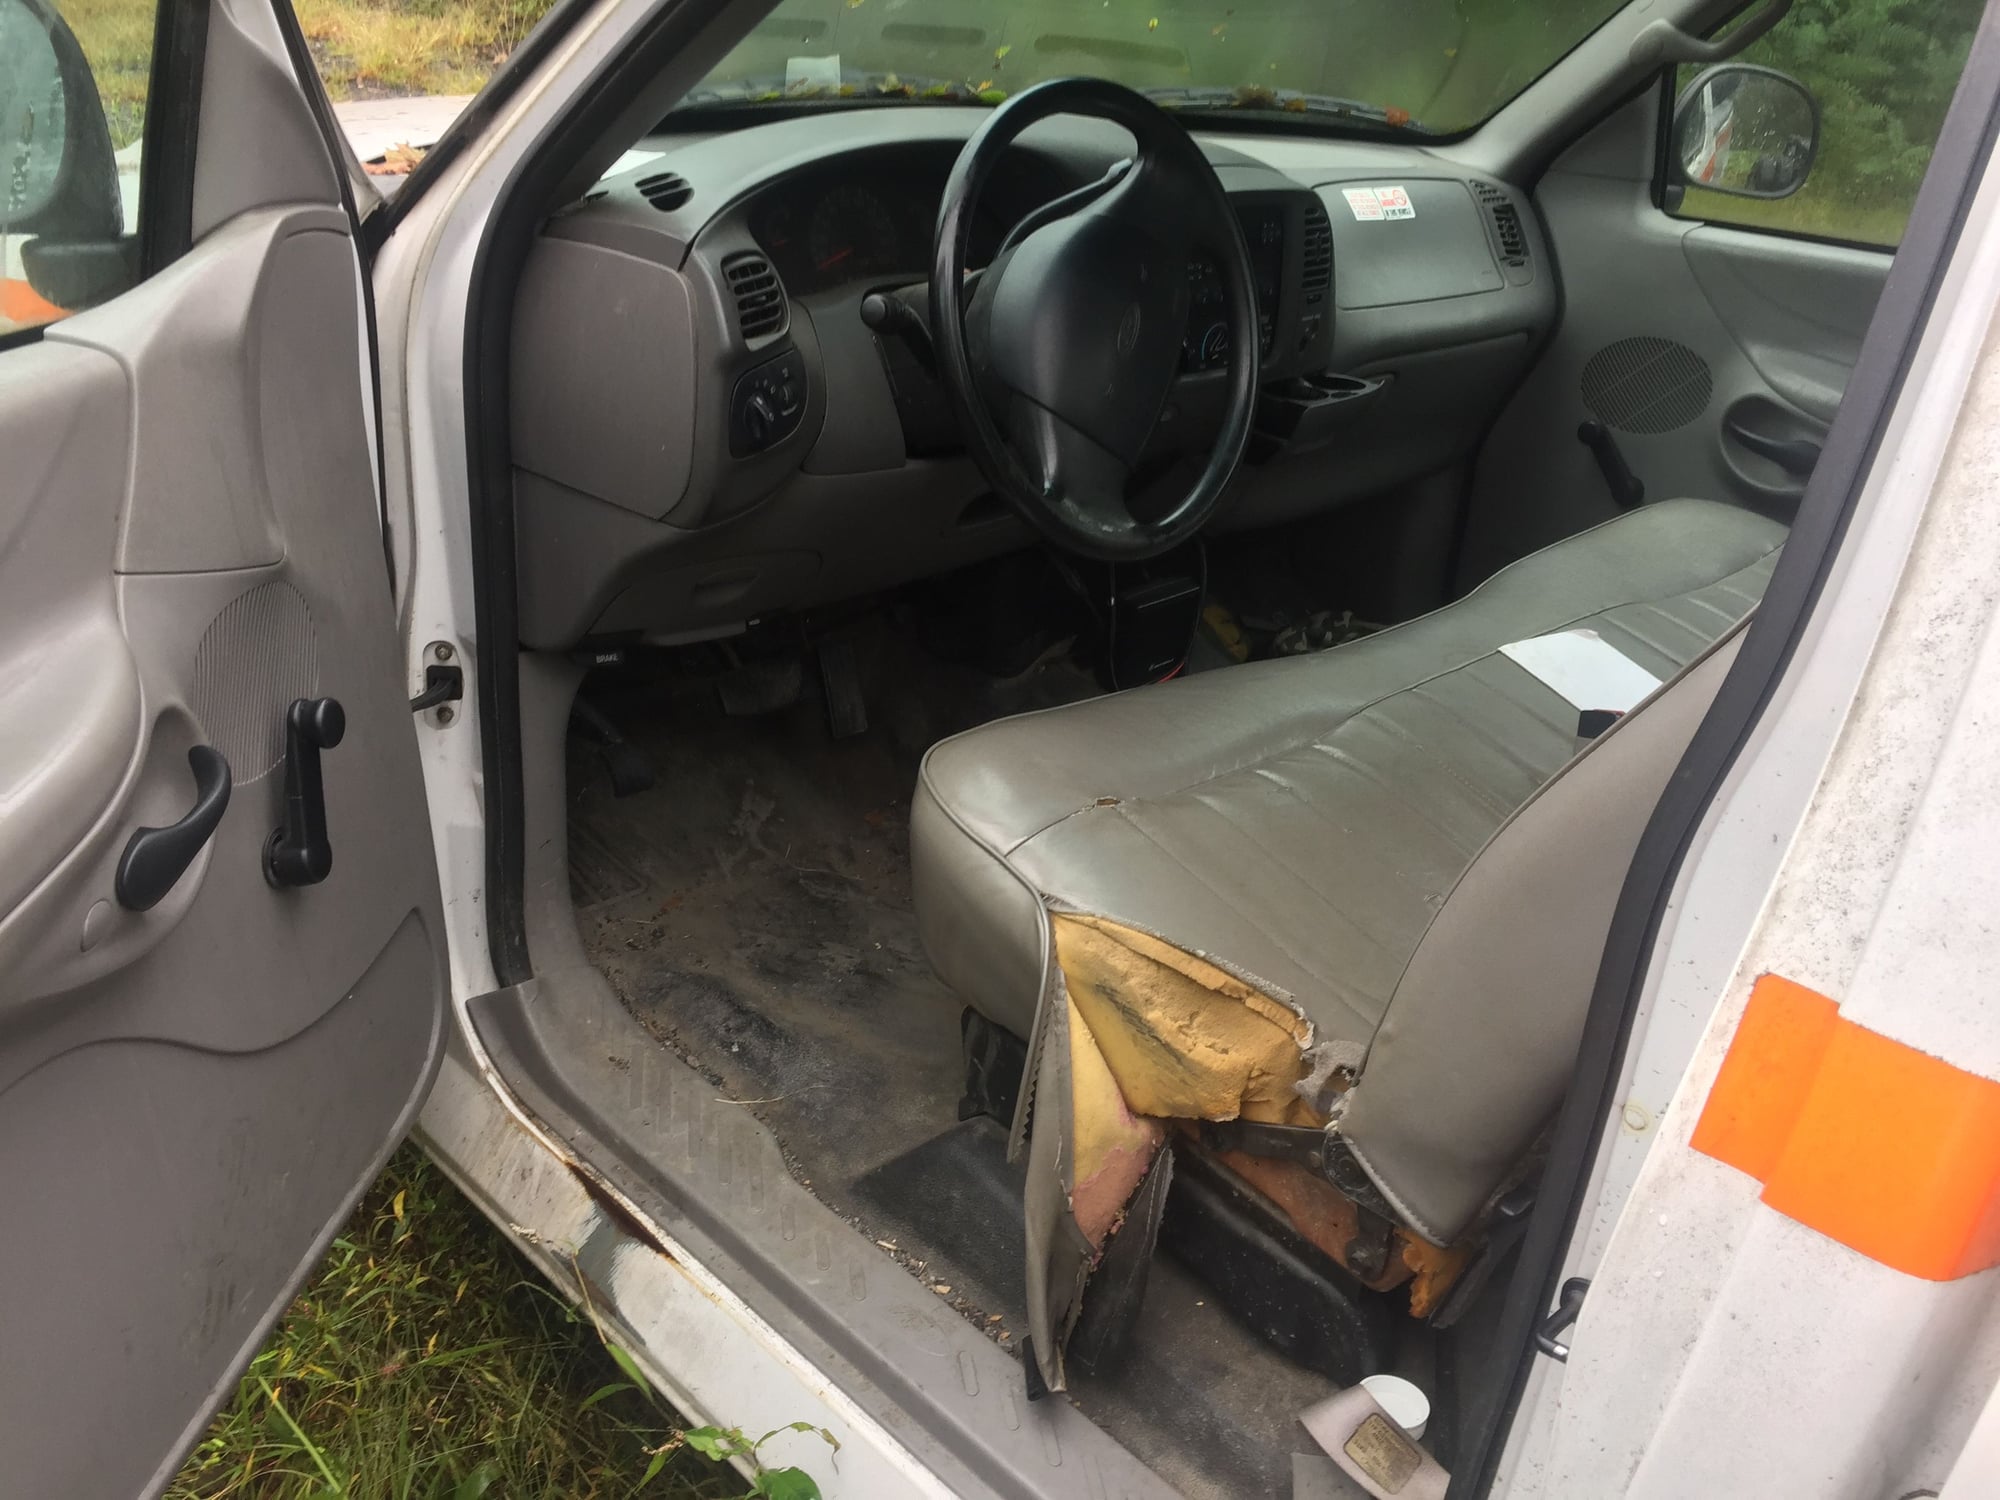 1998 Ford F-150 - 98 F150 FOR PARTS OR REPAIR NEEDS TRANNY GOOD SOLID TRUCK BLOWS COLD NO RATTLES - Used - VIN 1FTDF1721VKC95747 - 190,000 Miles - 6 cyl - 2WD - Automatic - Truck - White - Shenandoah, PA 17976, United States